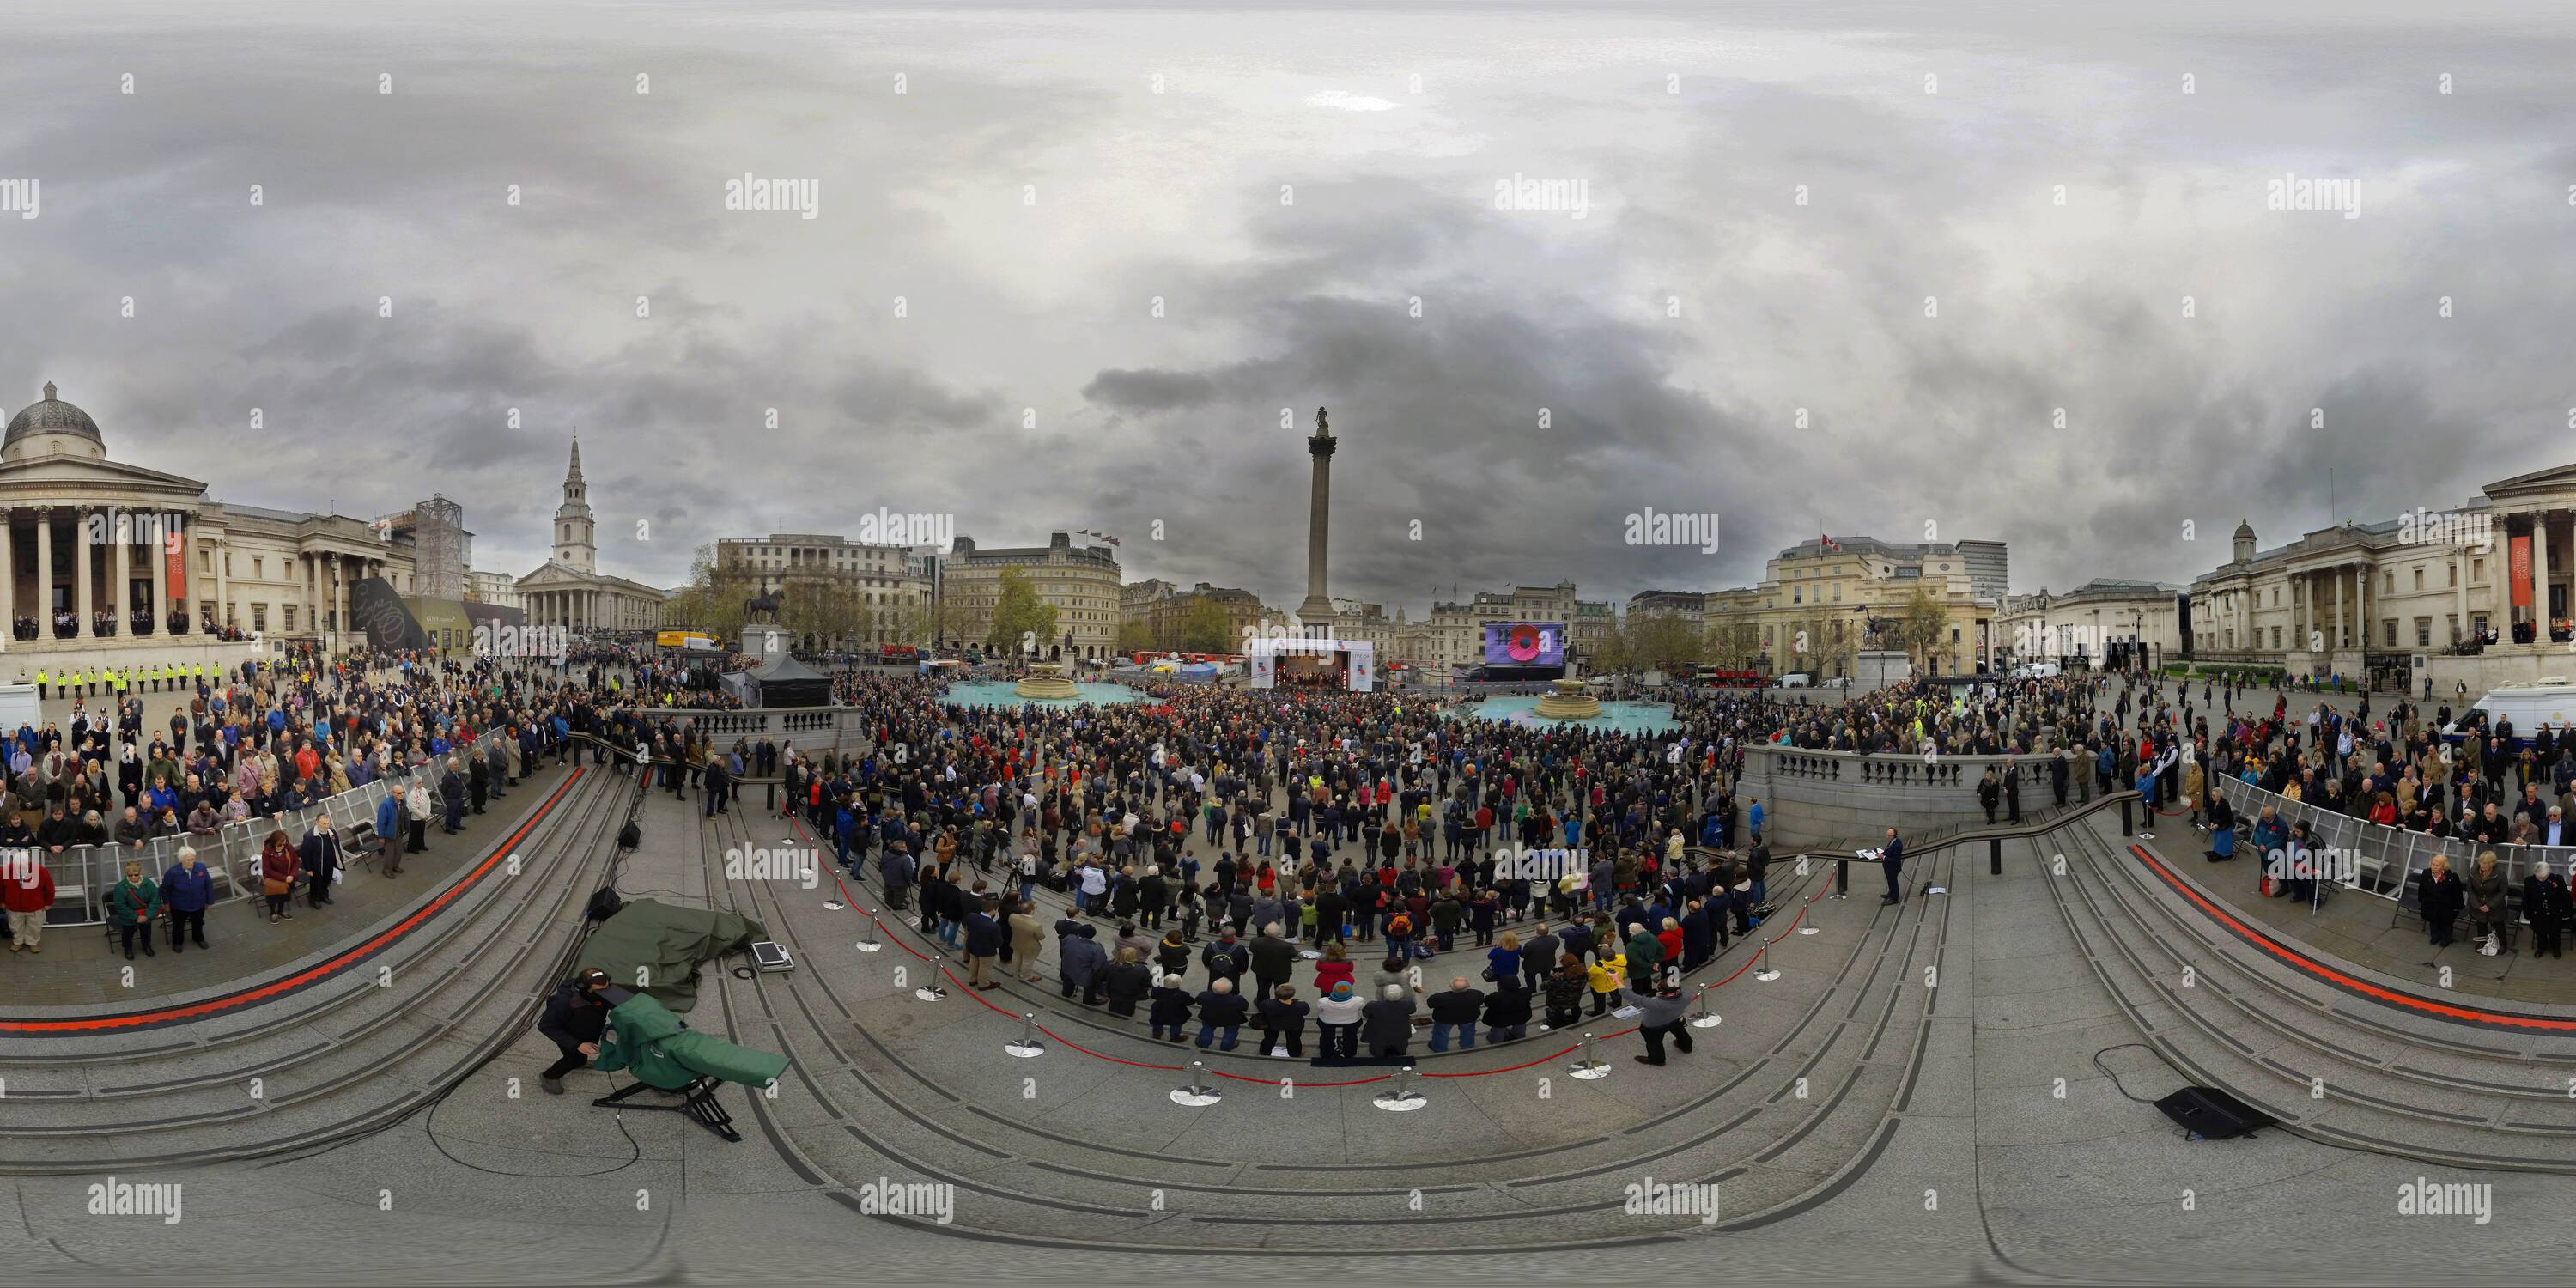 360 degree panoramic view of “Silence In The Square'. Crowds gather in Trafalgar Square Central London for 2 minutes silence at 11am on 11th November. Picture : MARK PAIN / ALAMY